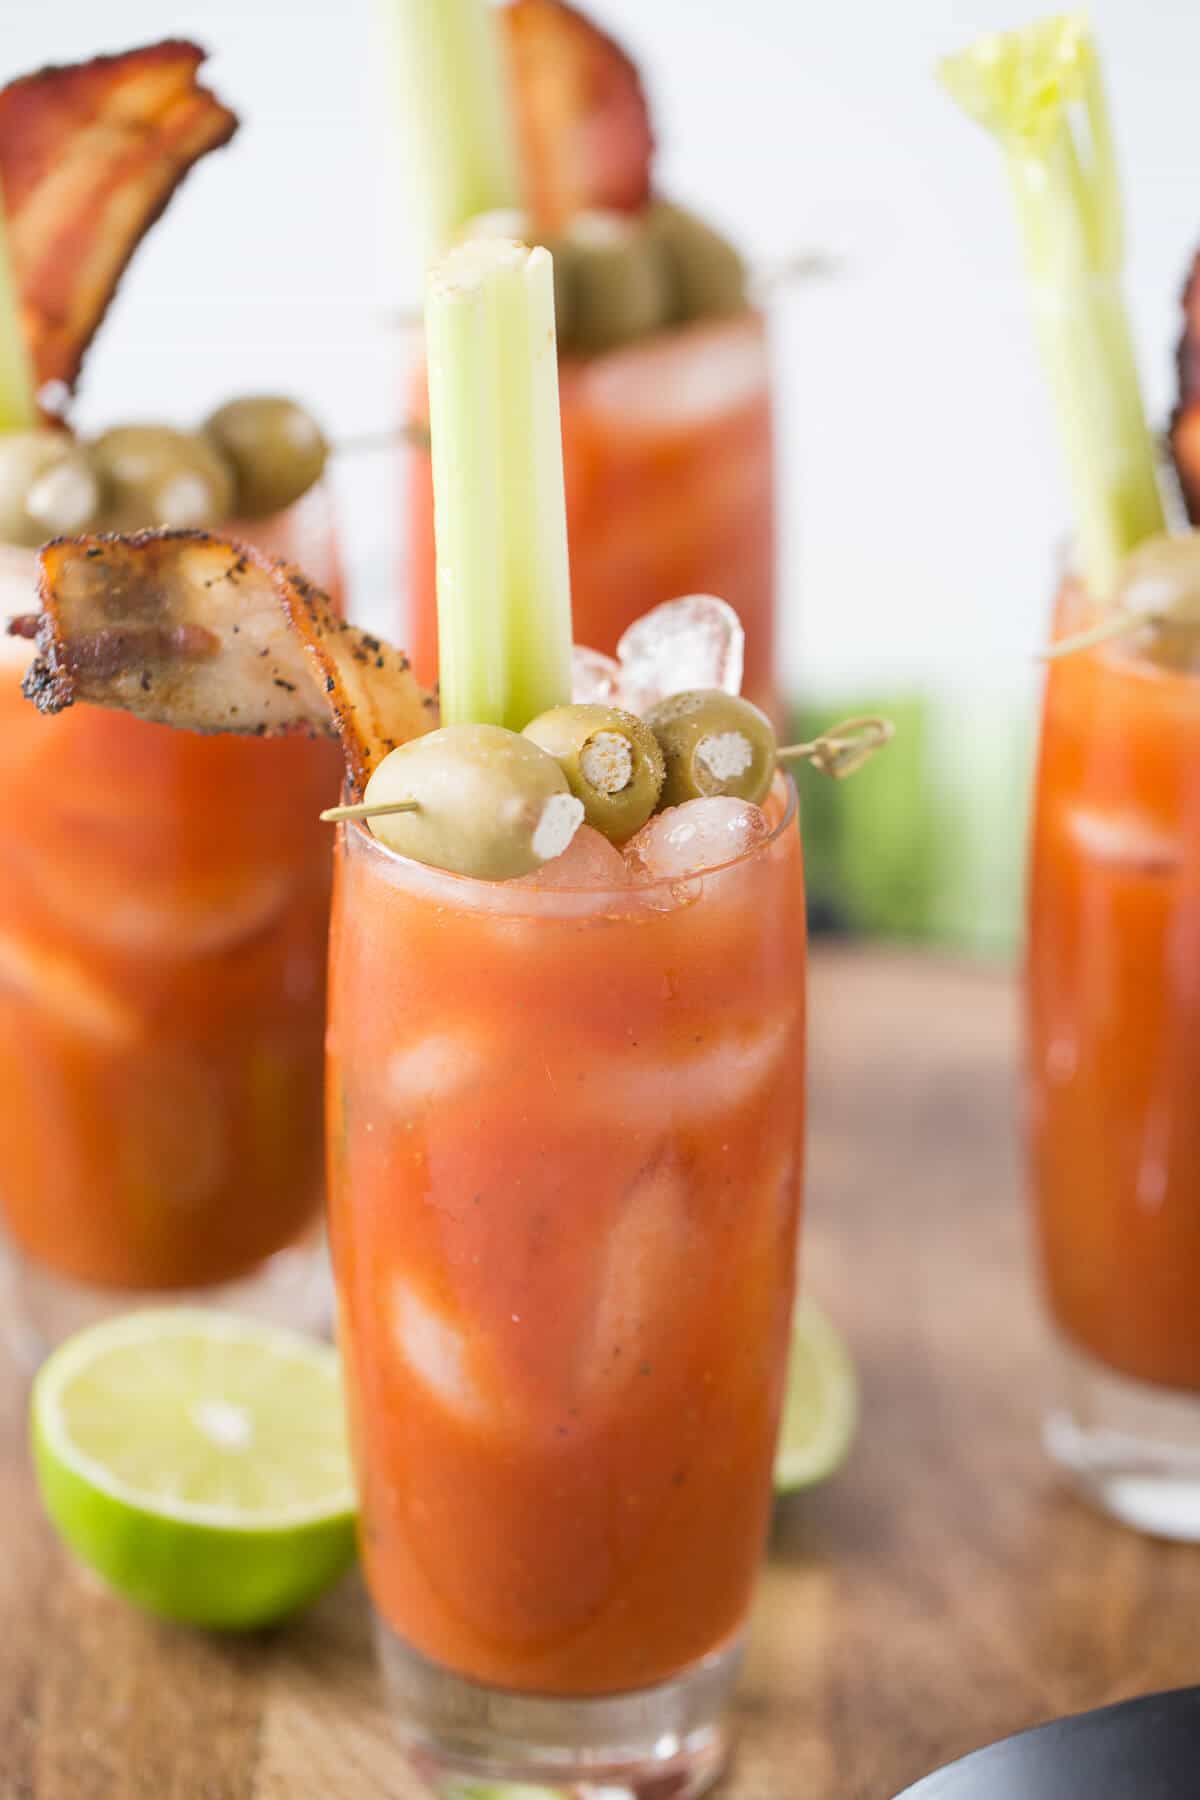 This bloody Mary has one spicy kick! If you are a Buffalo lover, then this cocktail is for you!!